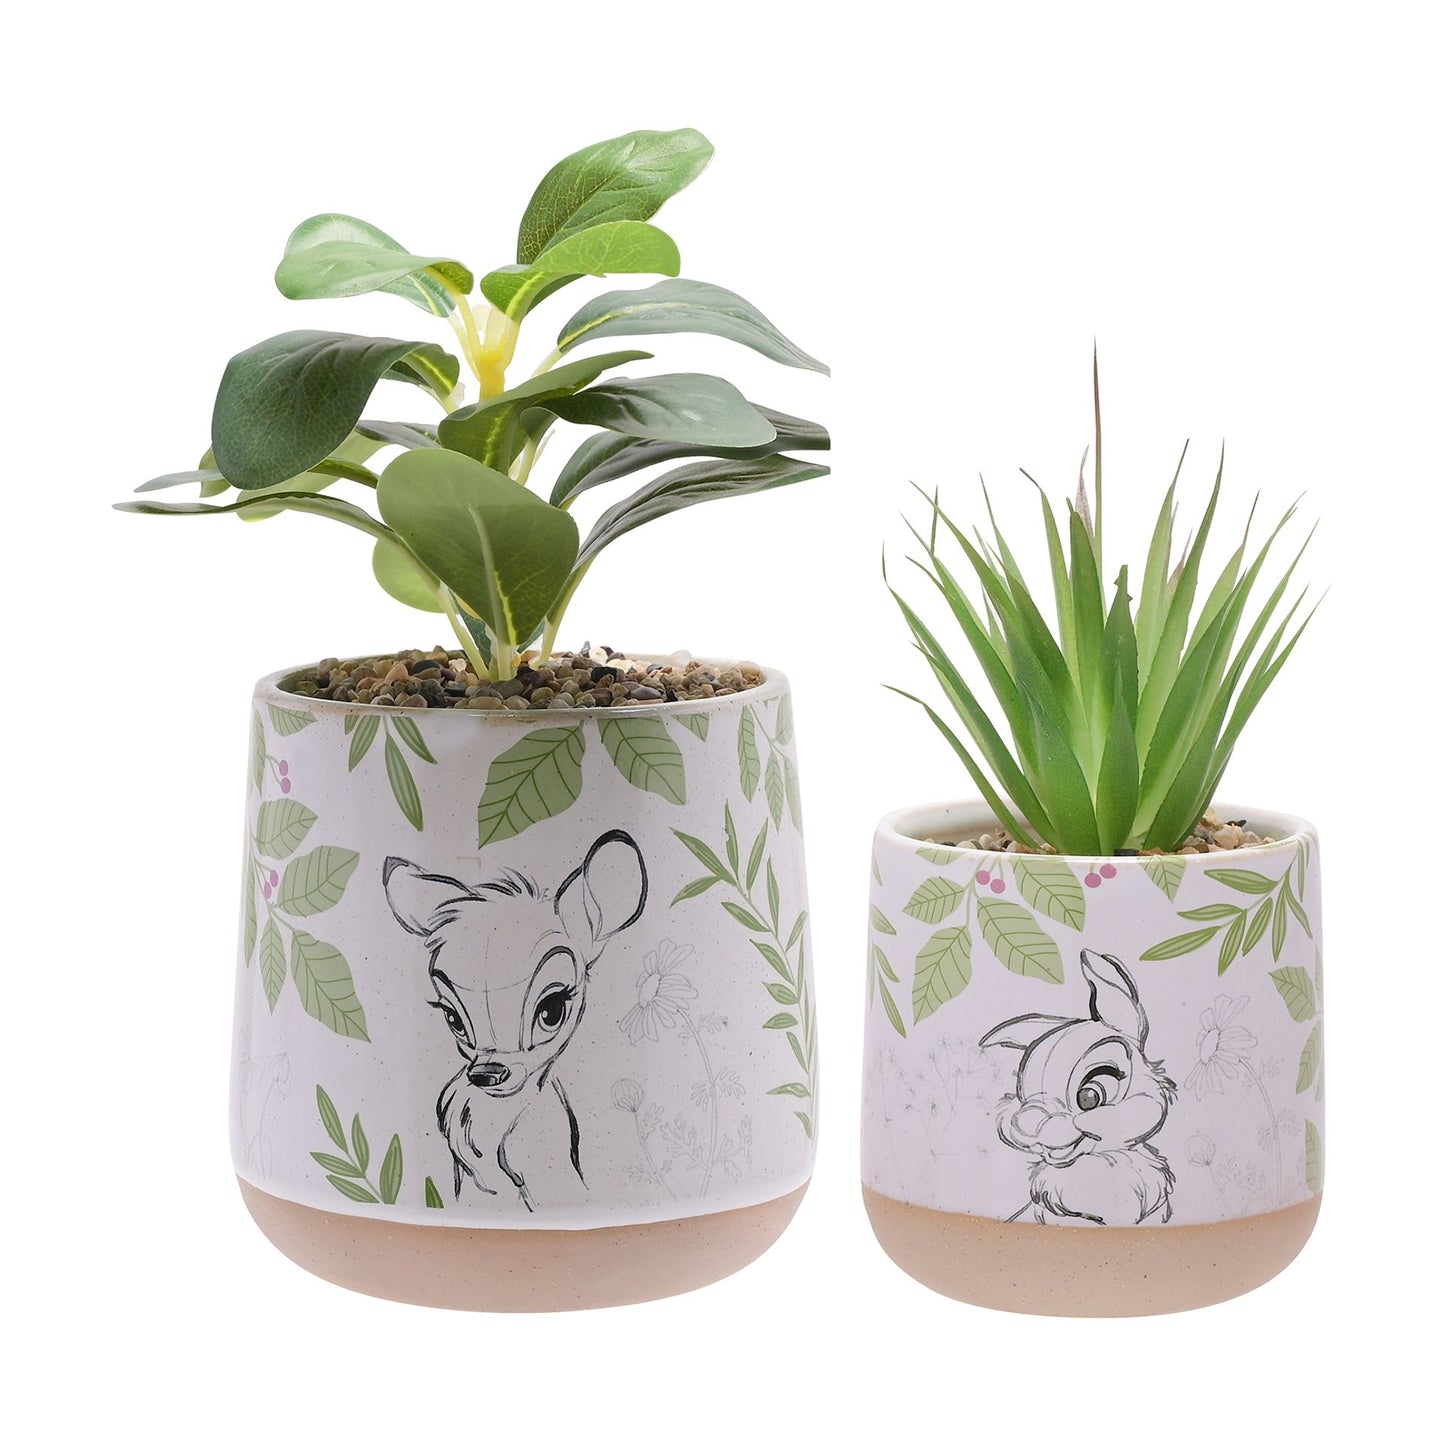 DISNEY FOREST FRIENDS - SET OF 2 BAMBI PLANTERS